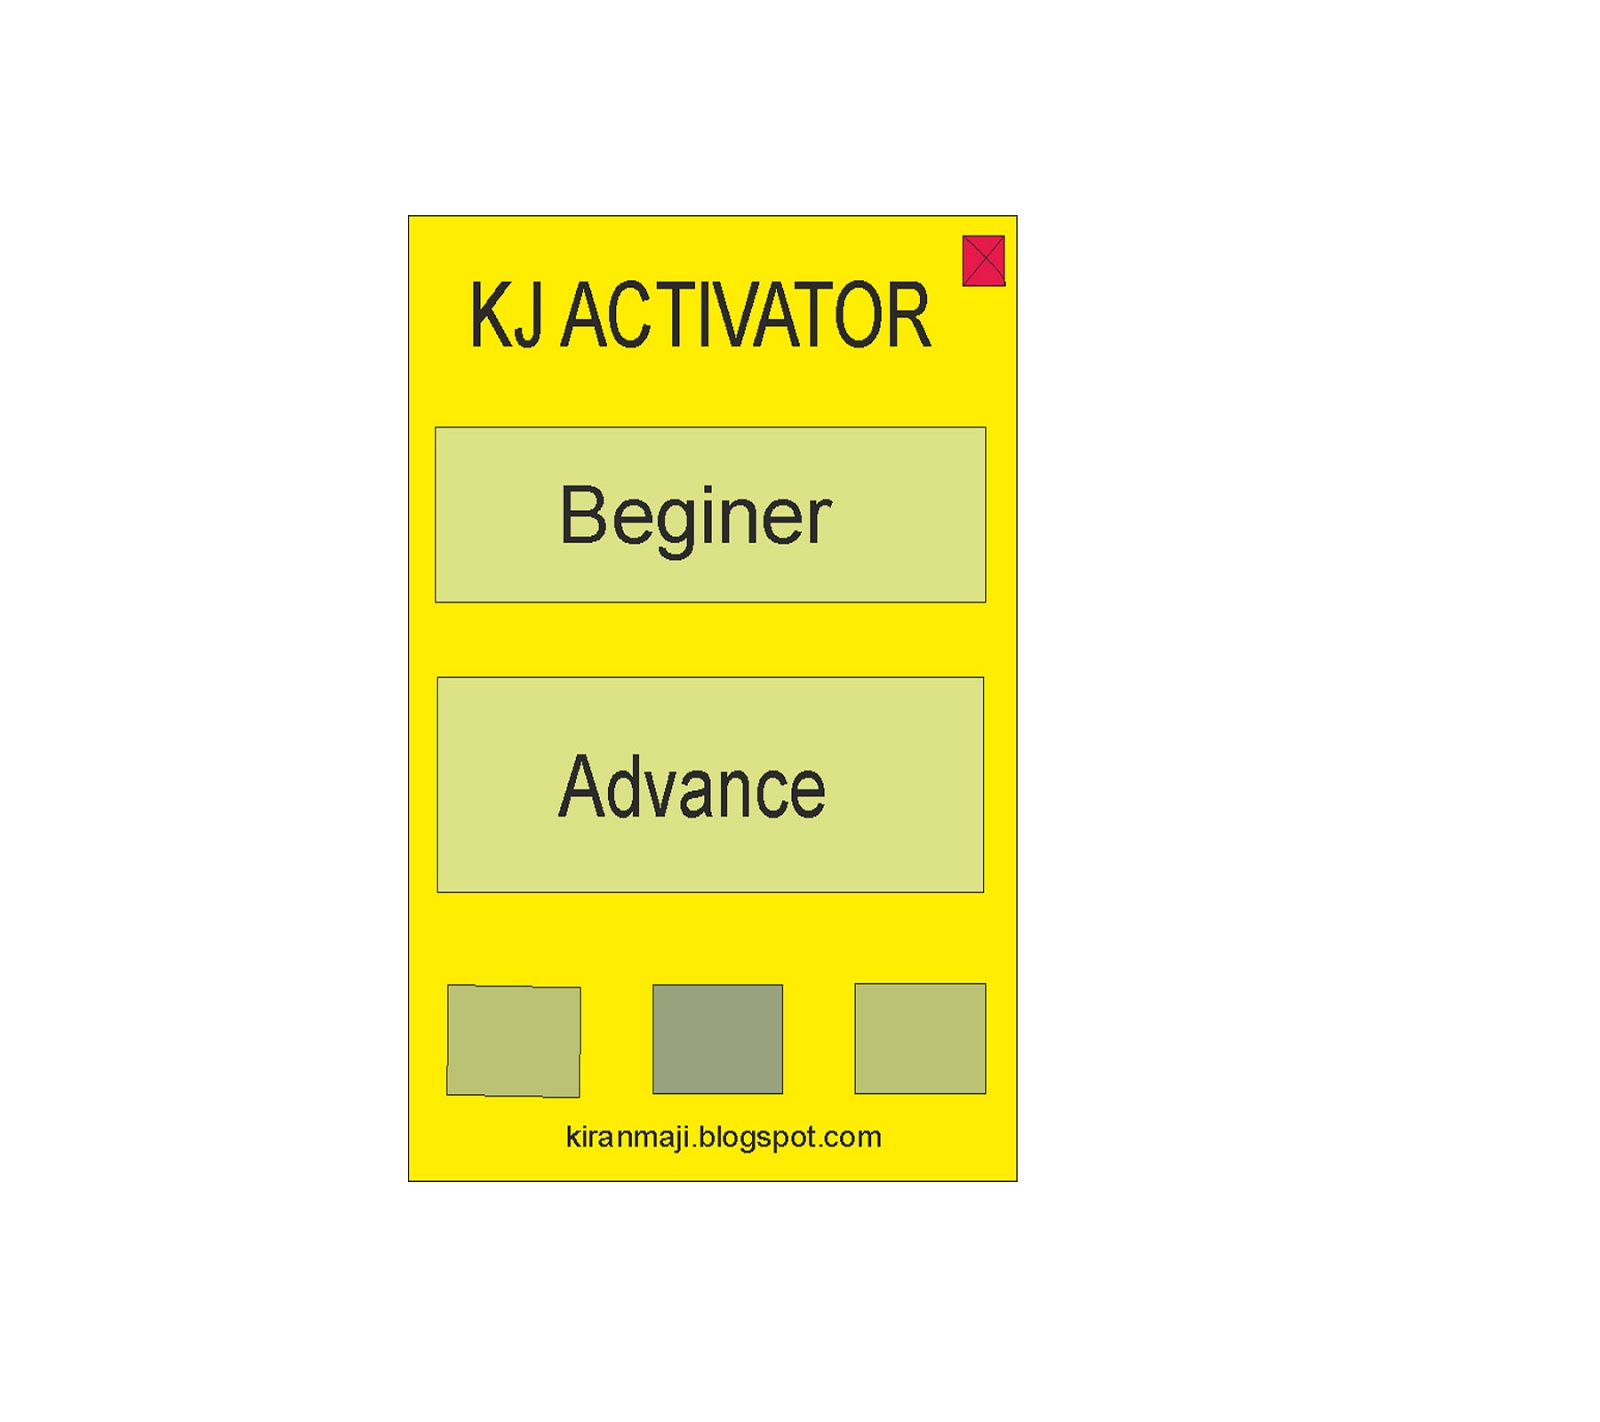 Kj pirate activator windows 8 how to use